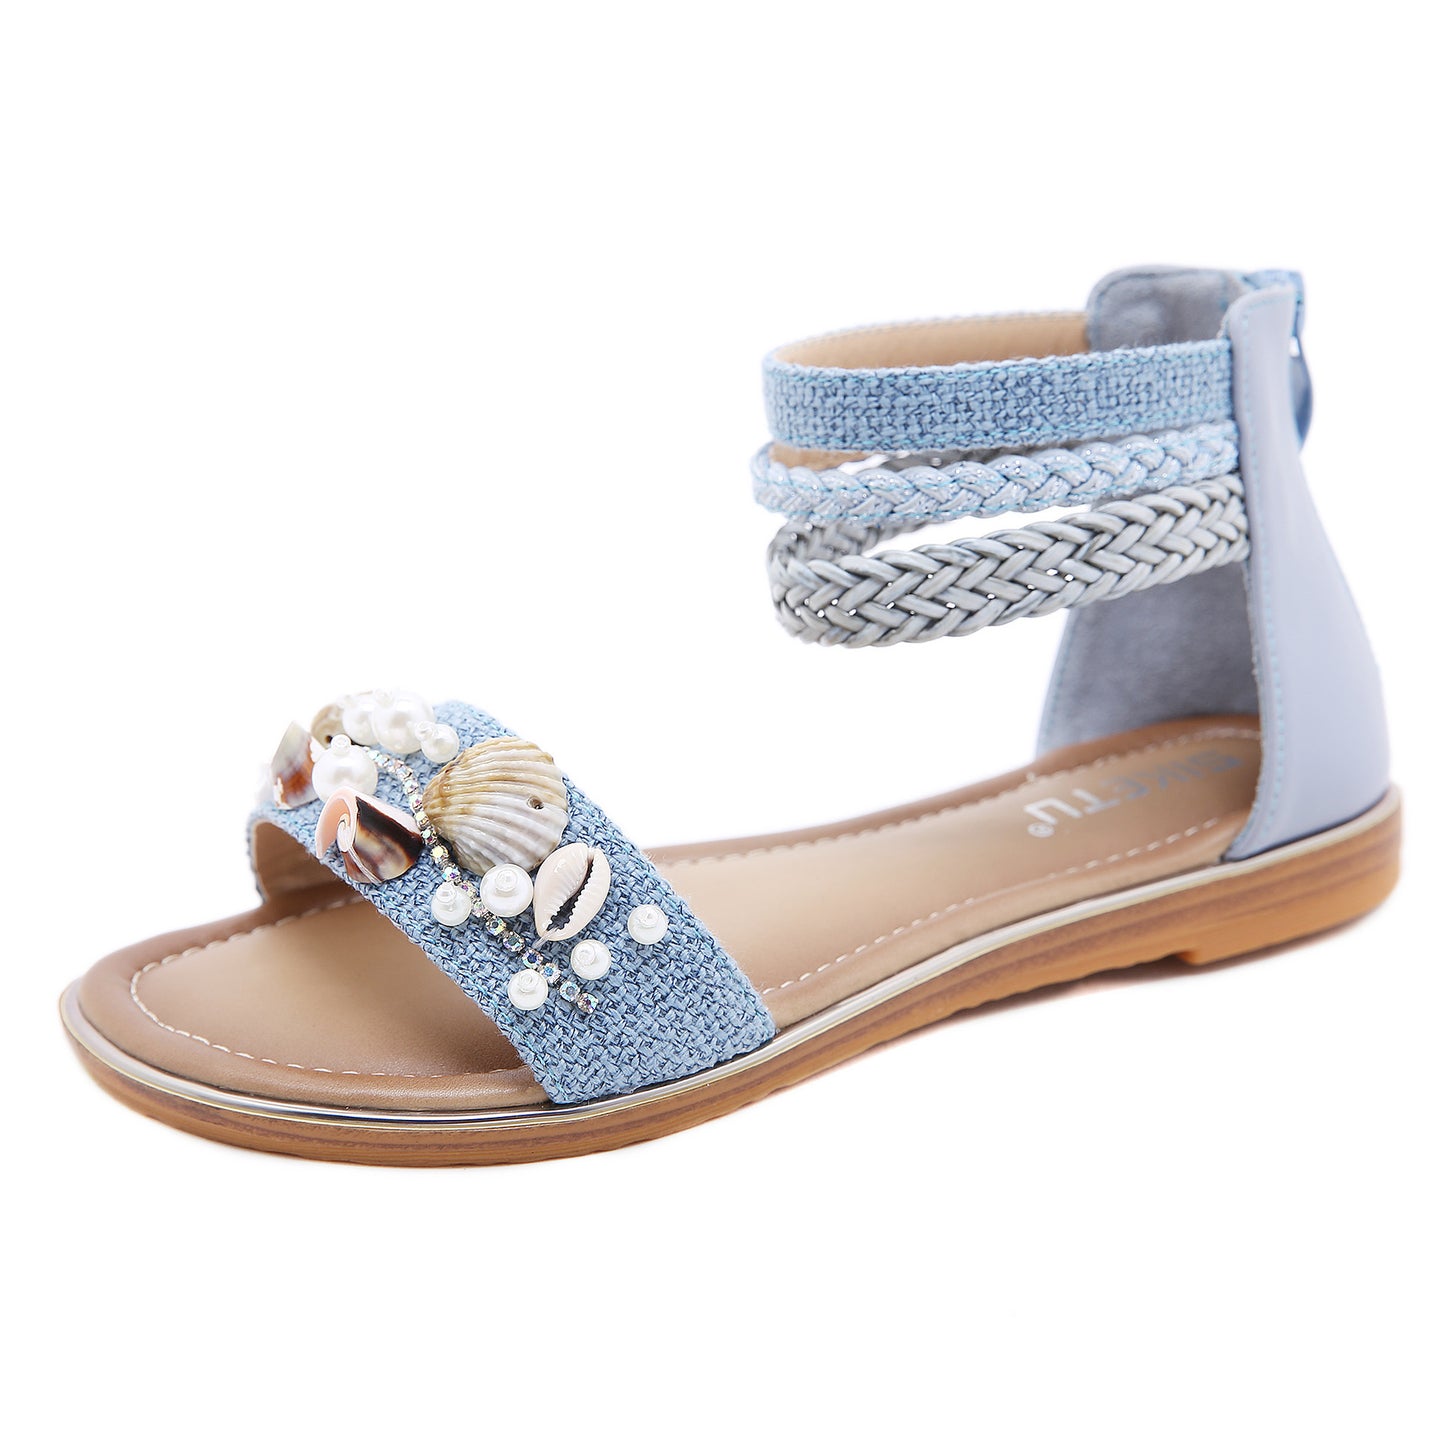 Flat Bohemian Sandals With Beads and Shell